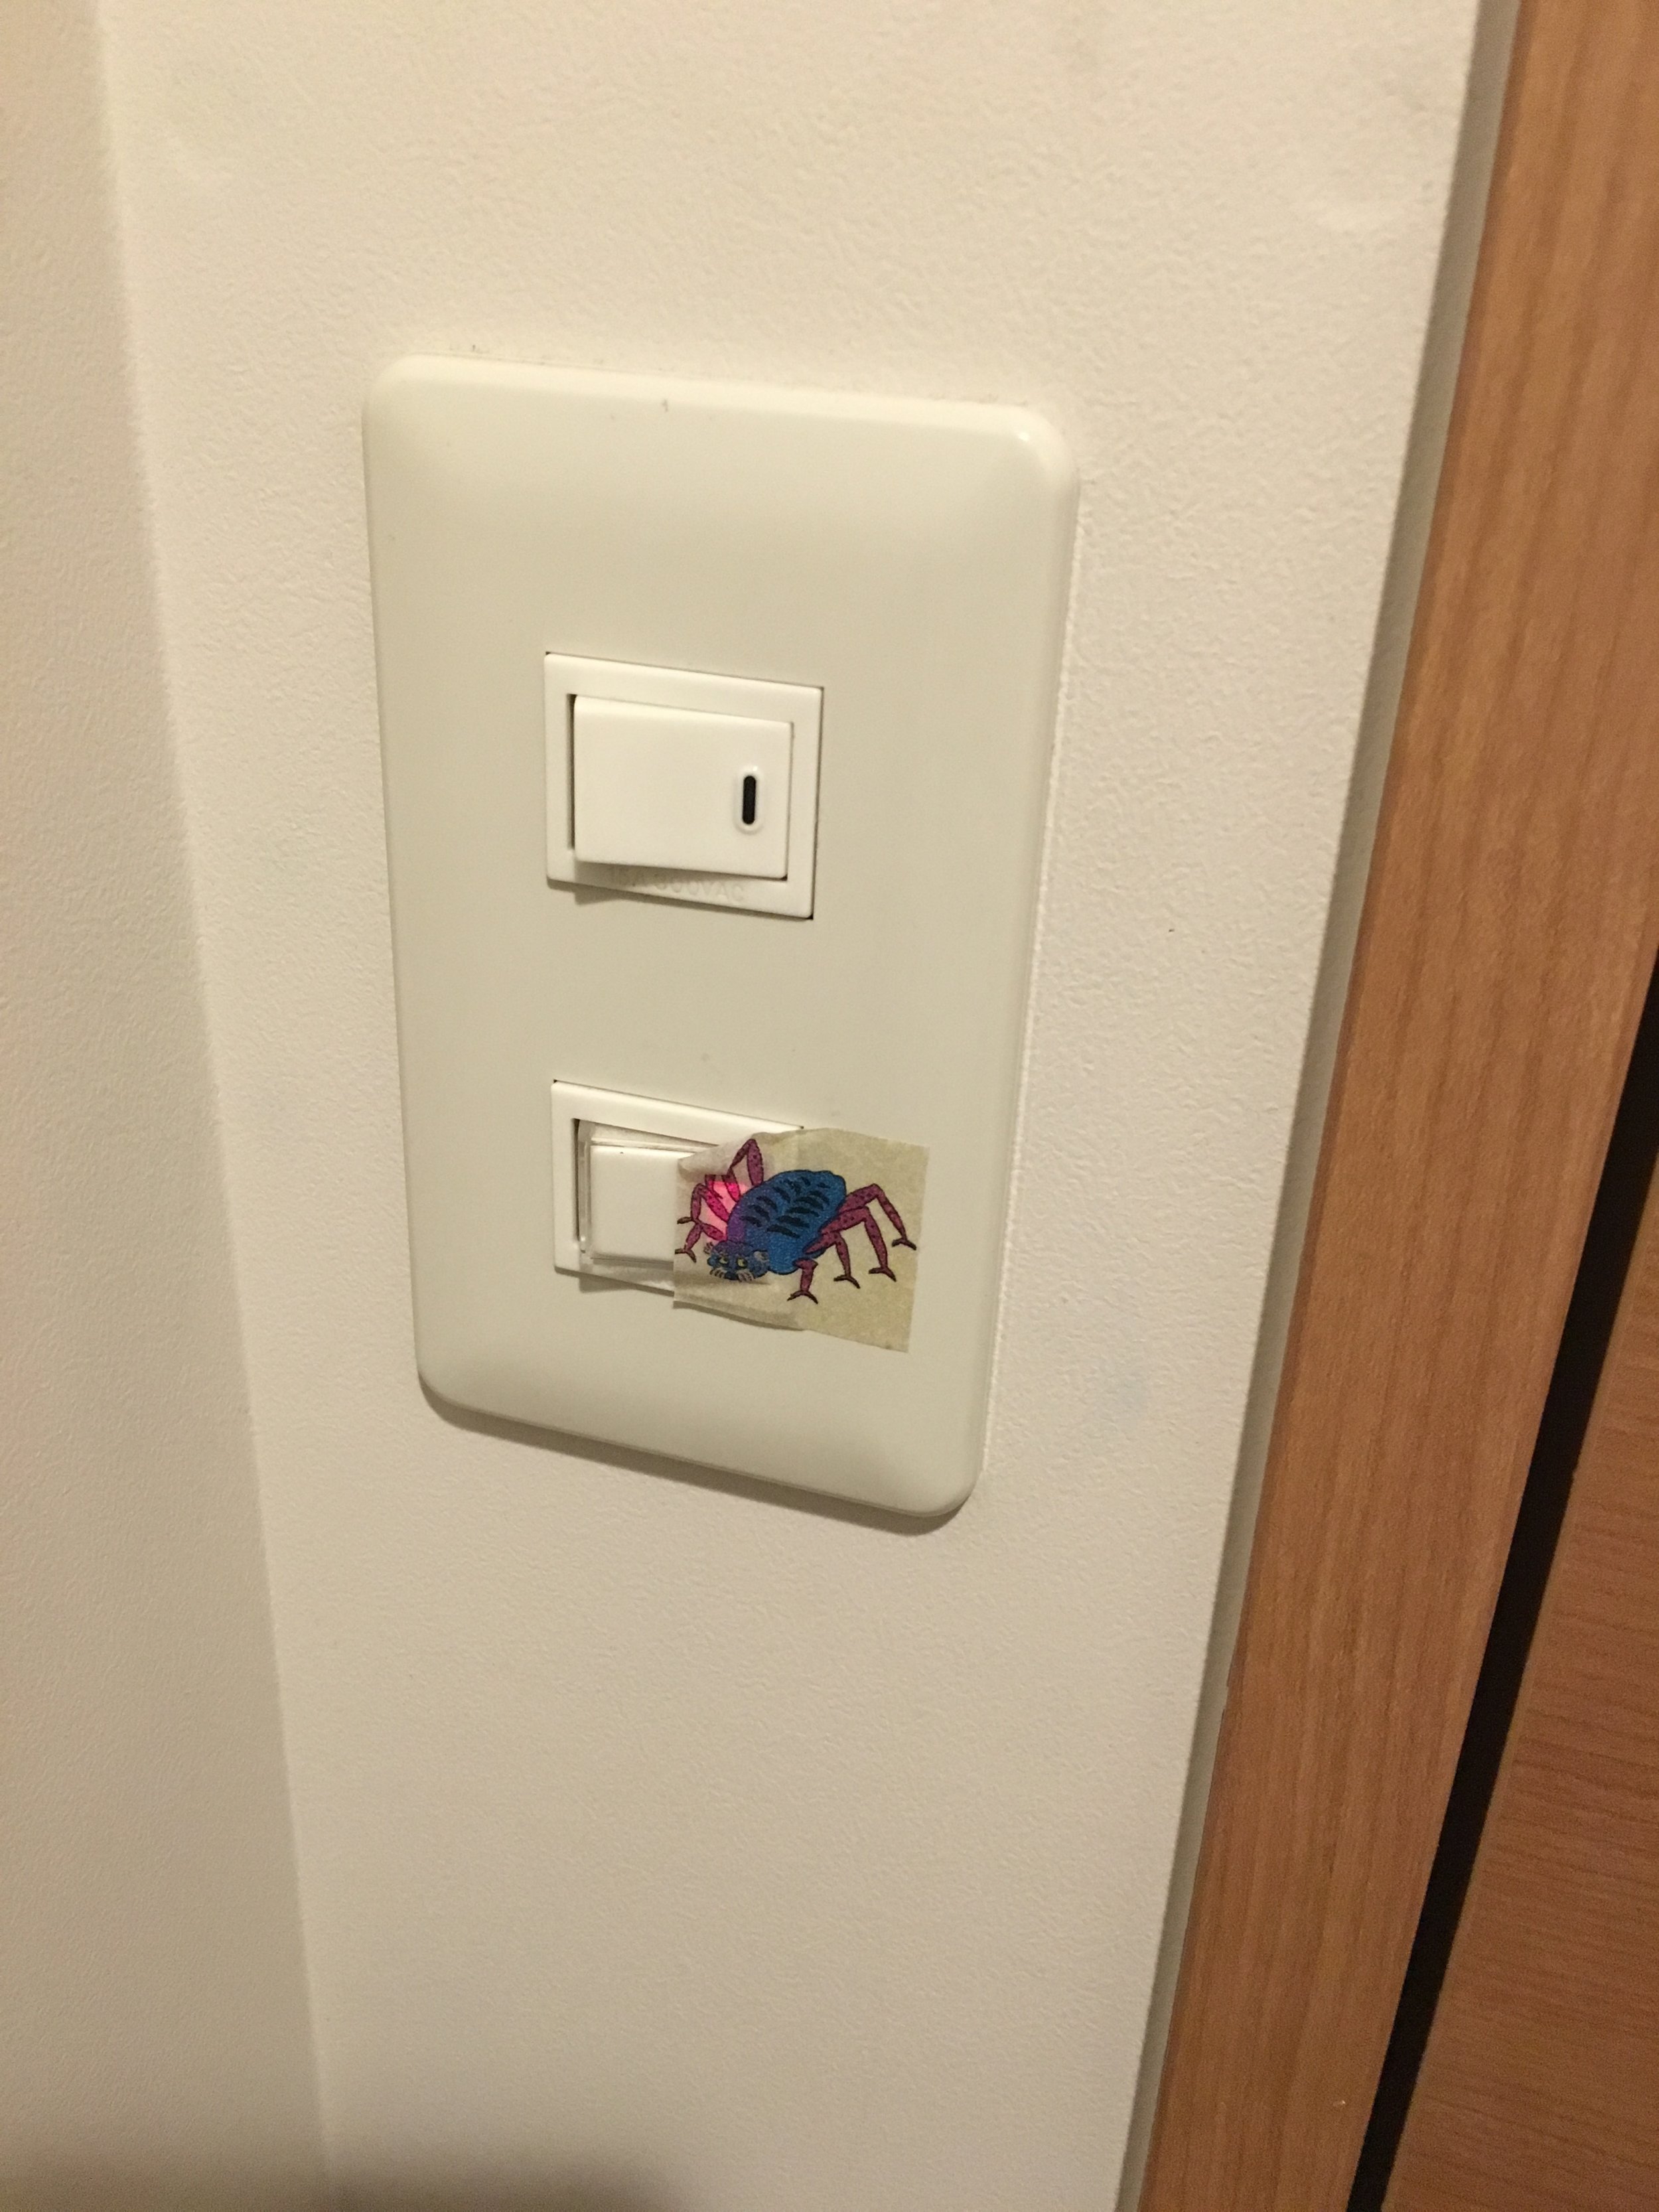 Top switch is the light. Bottom switch RELEASES THE ROACHES!